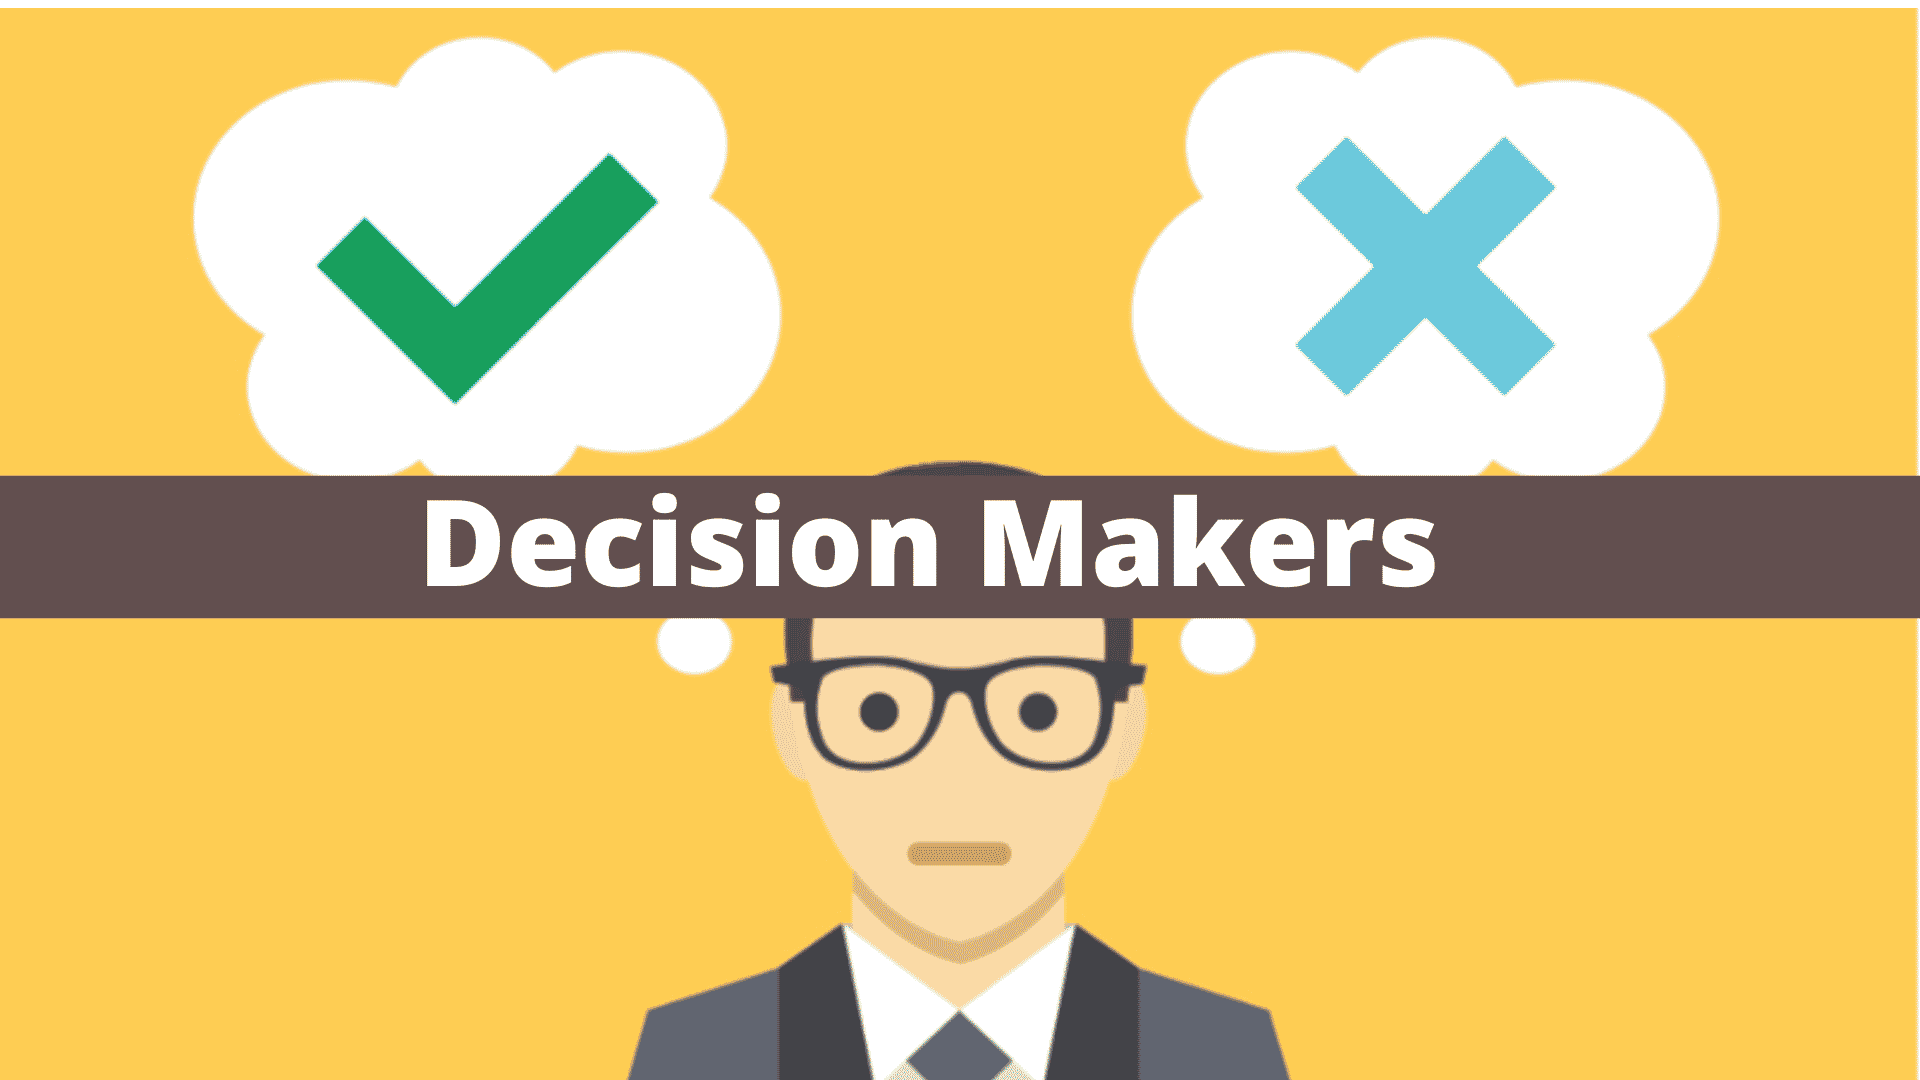 What is decision making in management?